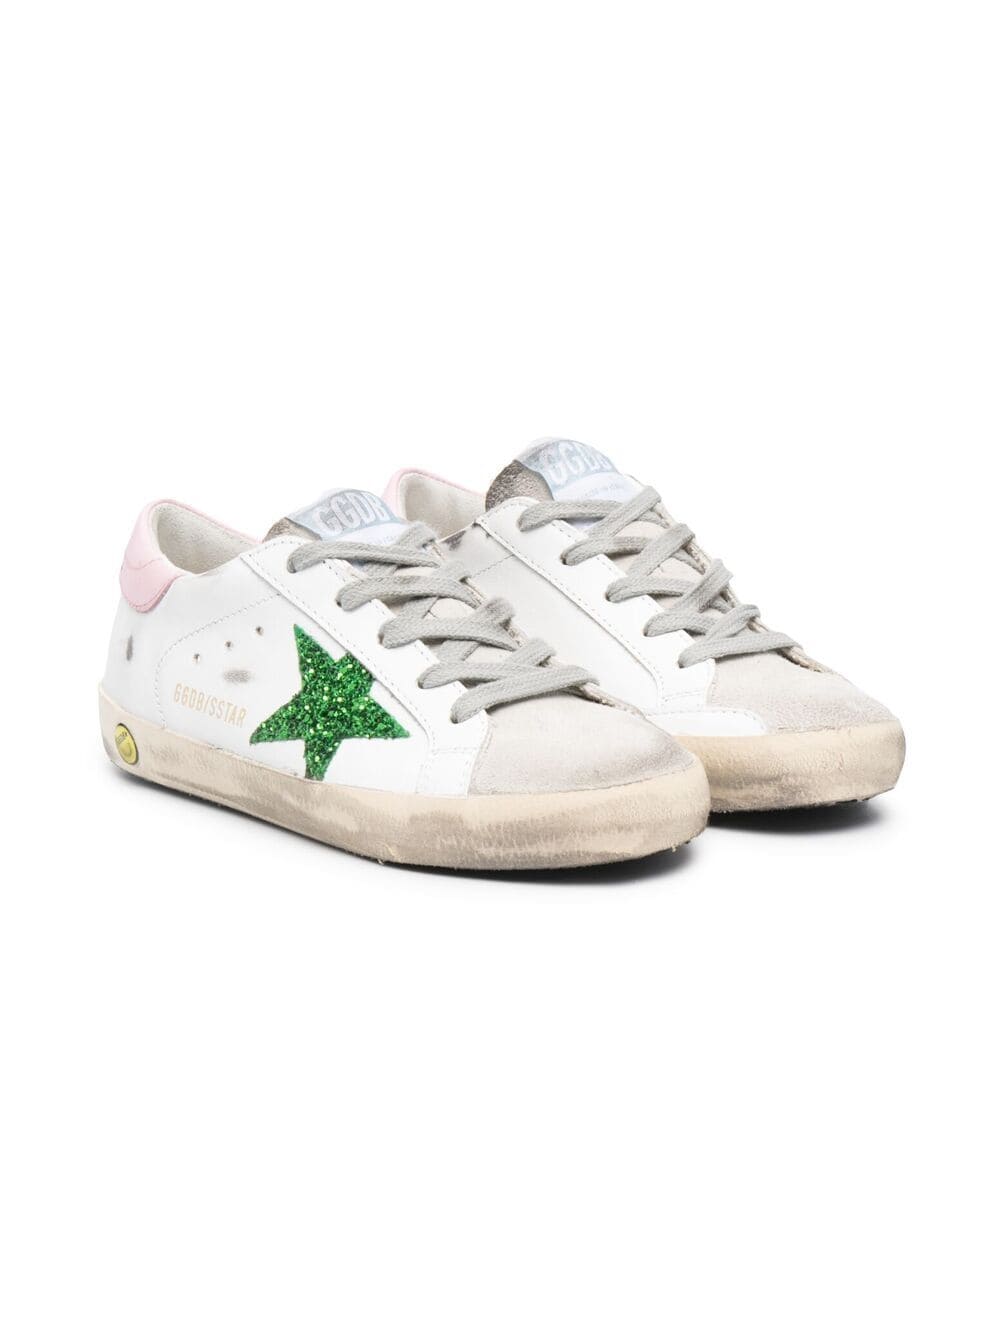 GOLDEN GOOSE SIGNATURE STAR-PATCH LACE-UP SNEAKERS